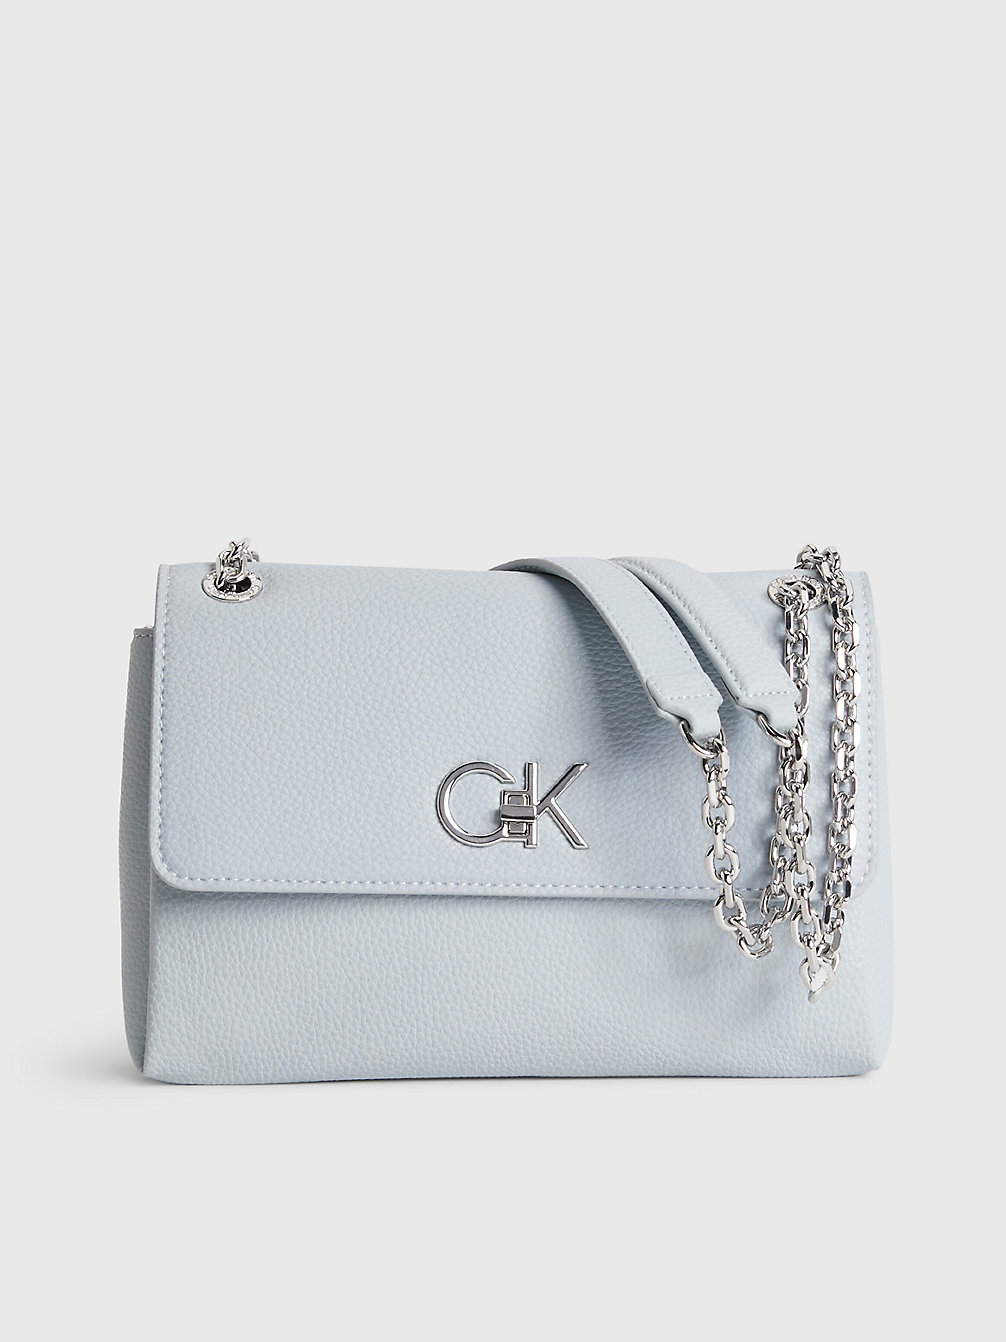 PEARL BLUE Recycled Convertible Shoulder Bag undefined women Calvin Klein